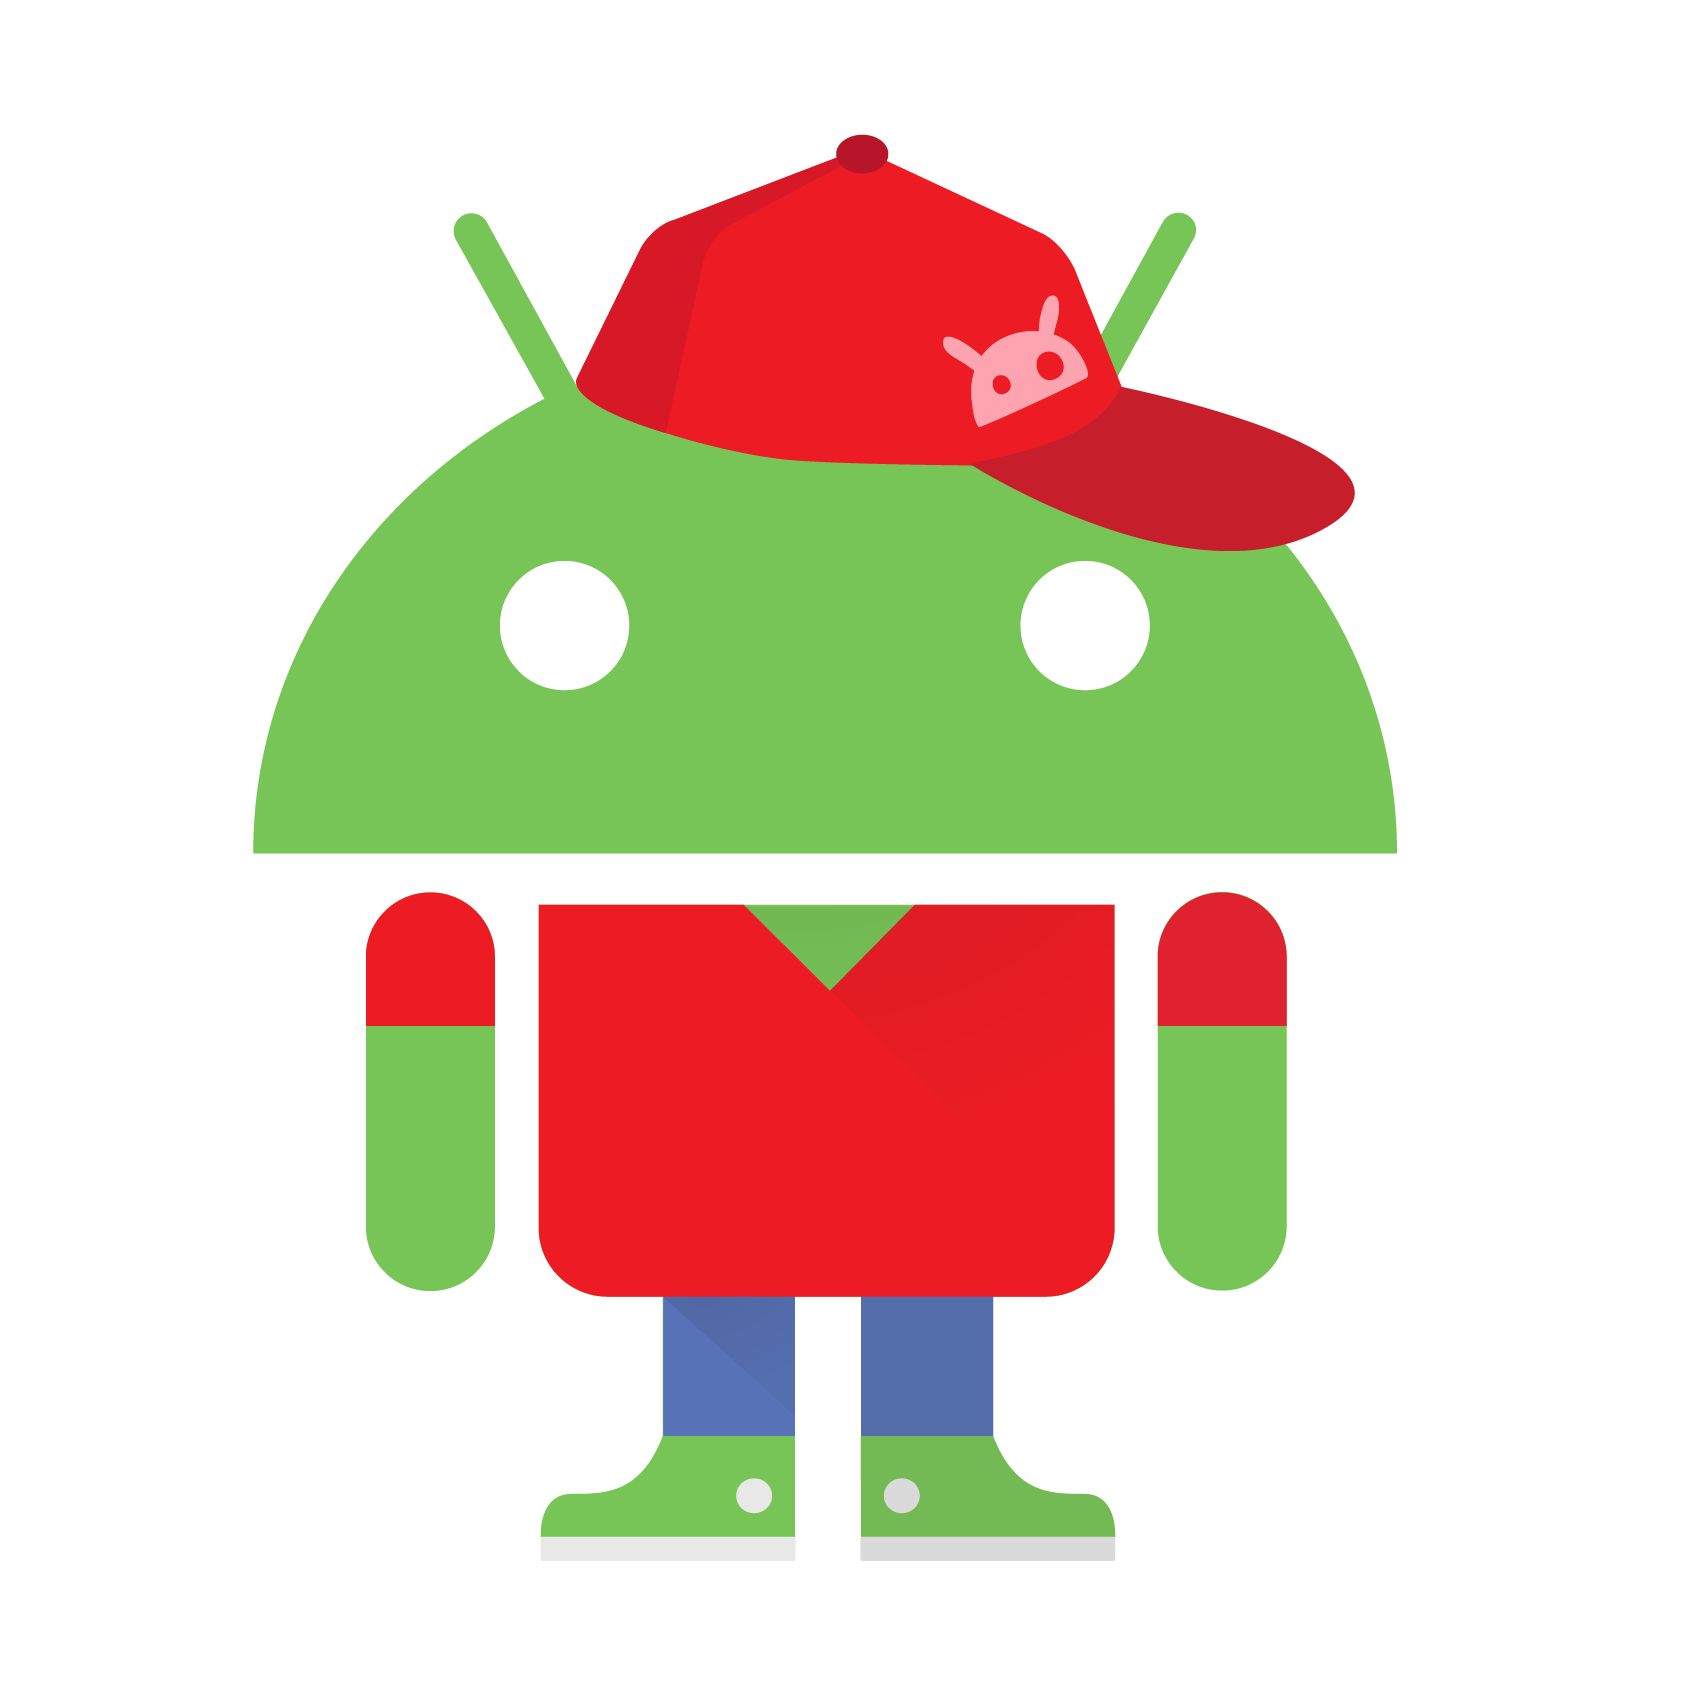 Play Android Google Avatar Download Free Image PNG Image